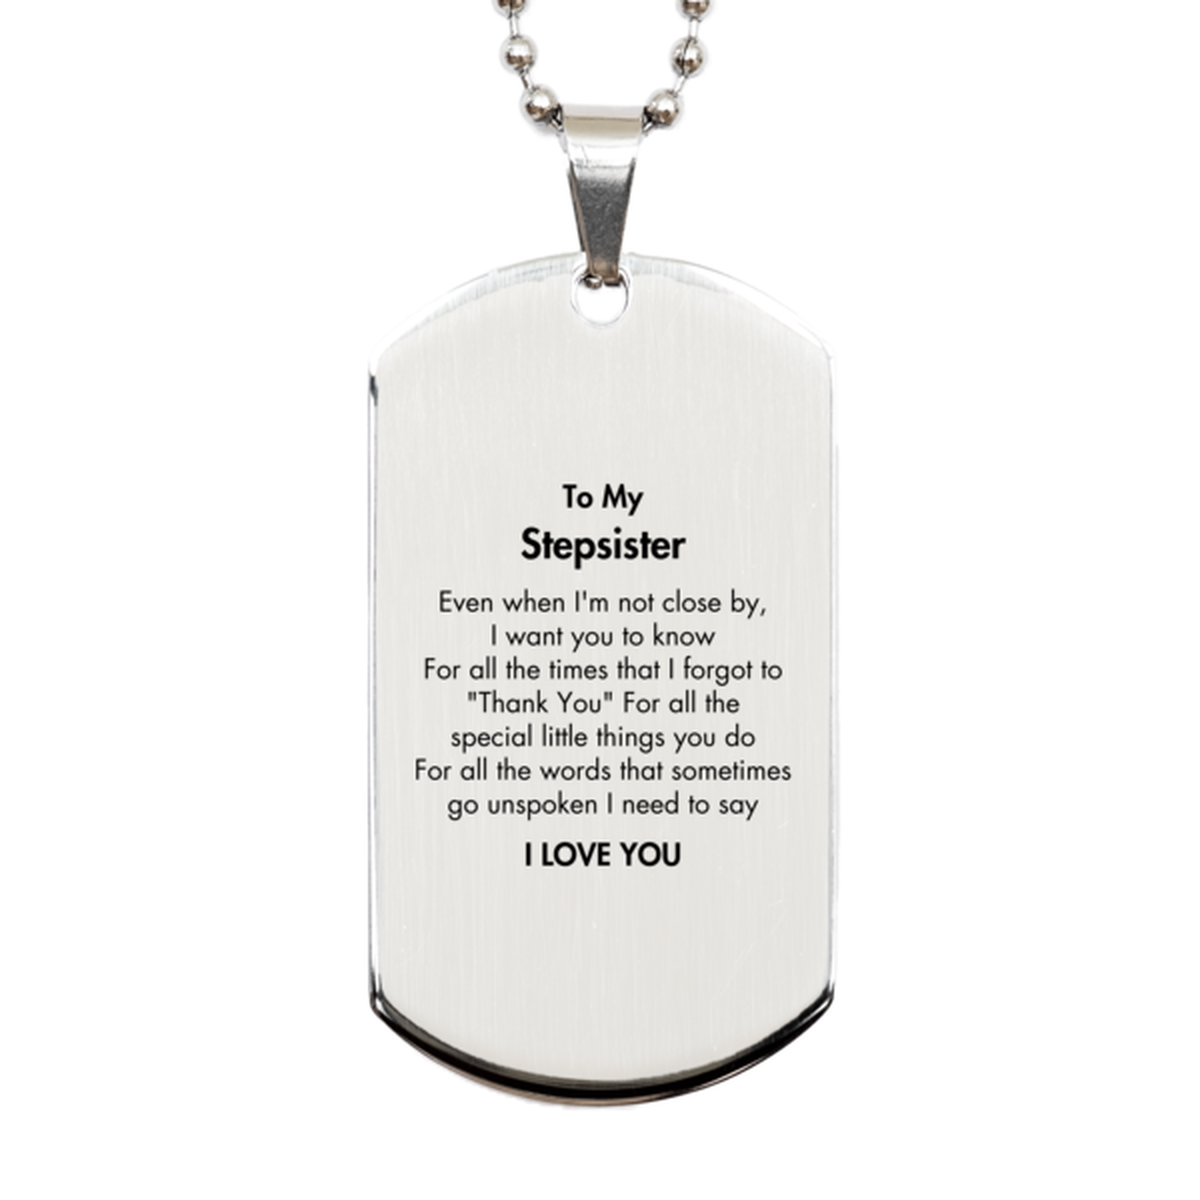 Thank You Gifts for Stepsister, Keepsake Silver Dog Tag Gifts for Stepsister Birthday Mother's day Father's Day Stepsister For all the words That sometimes go unspoken I need to say I LOVE YOU